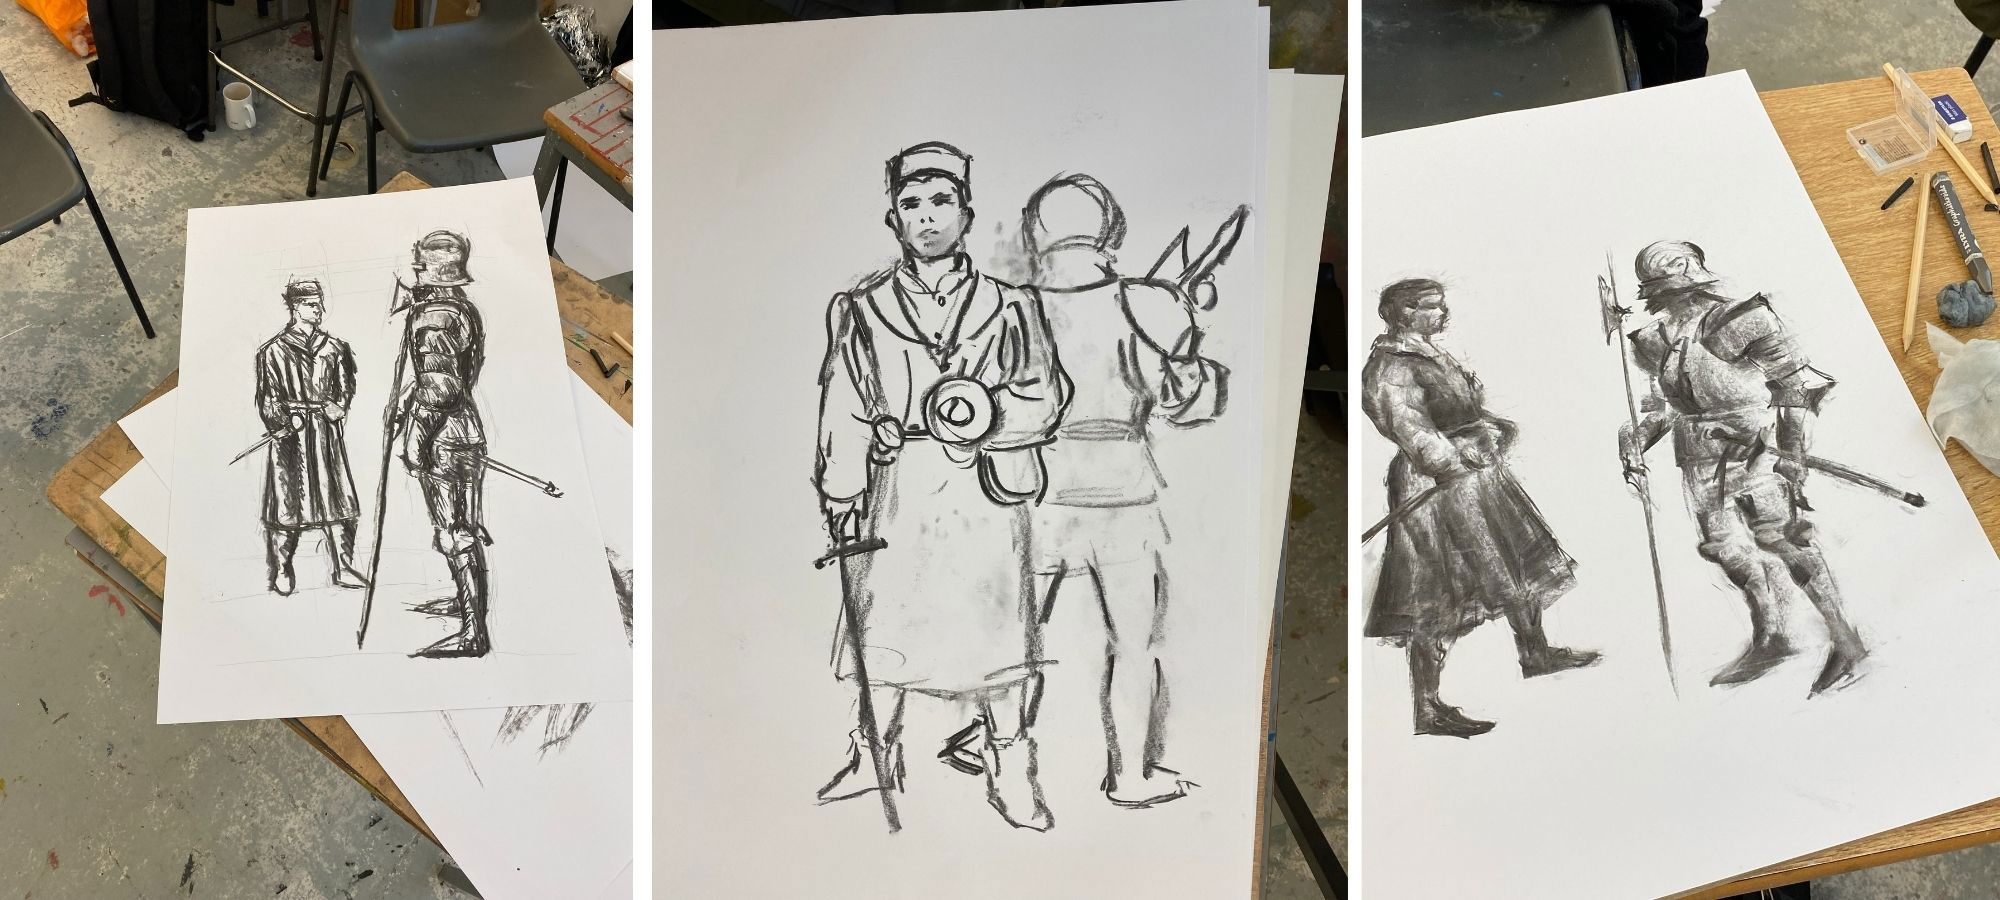 A collage of pencil sketches depicting people in medieval clothing